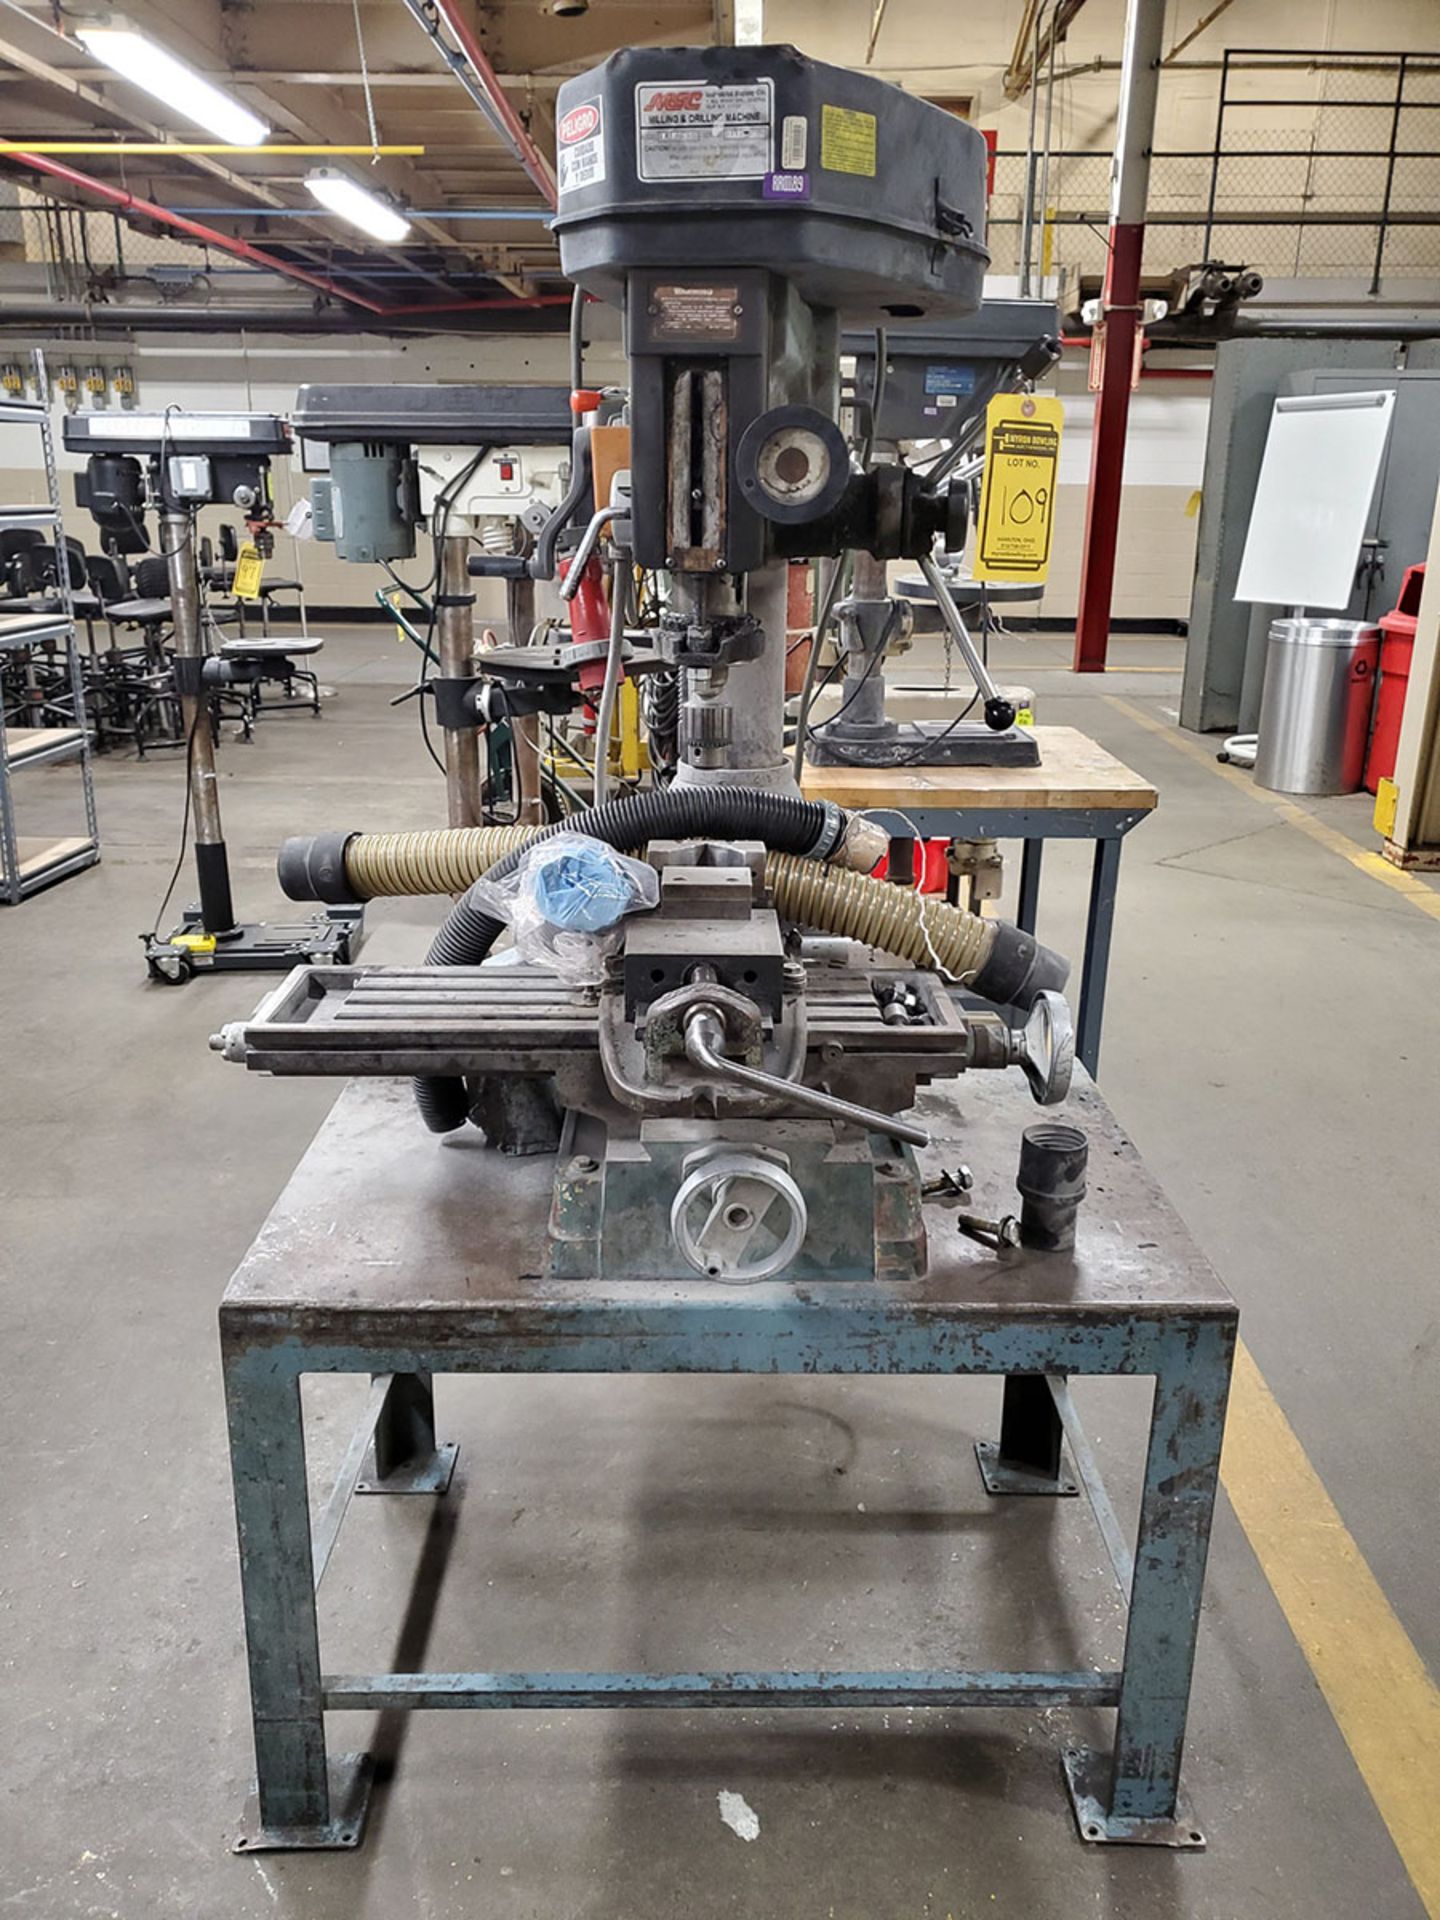 MSC MILLING AND DRILLING MACHINE; MODEL 954201, S/N 9991, MOUNTED ON TABLE WITH BRIDGEPORT VISE - Image 2 of 7